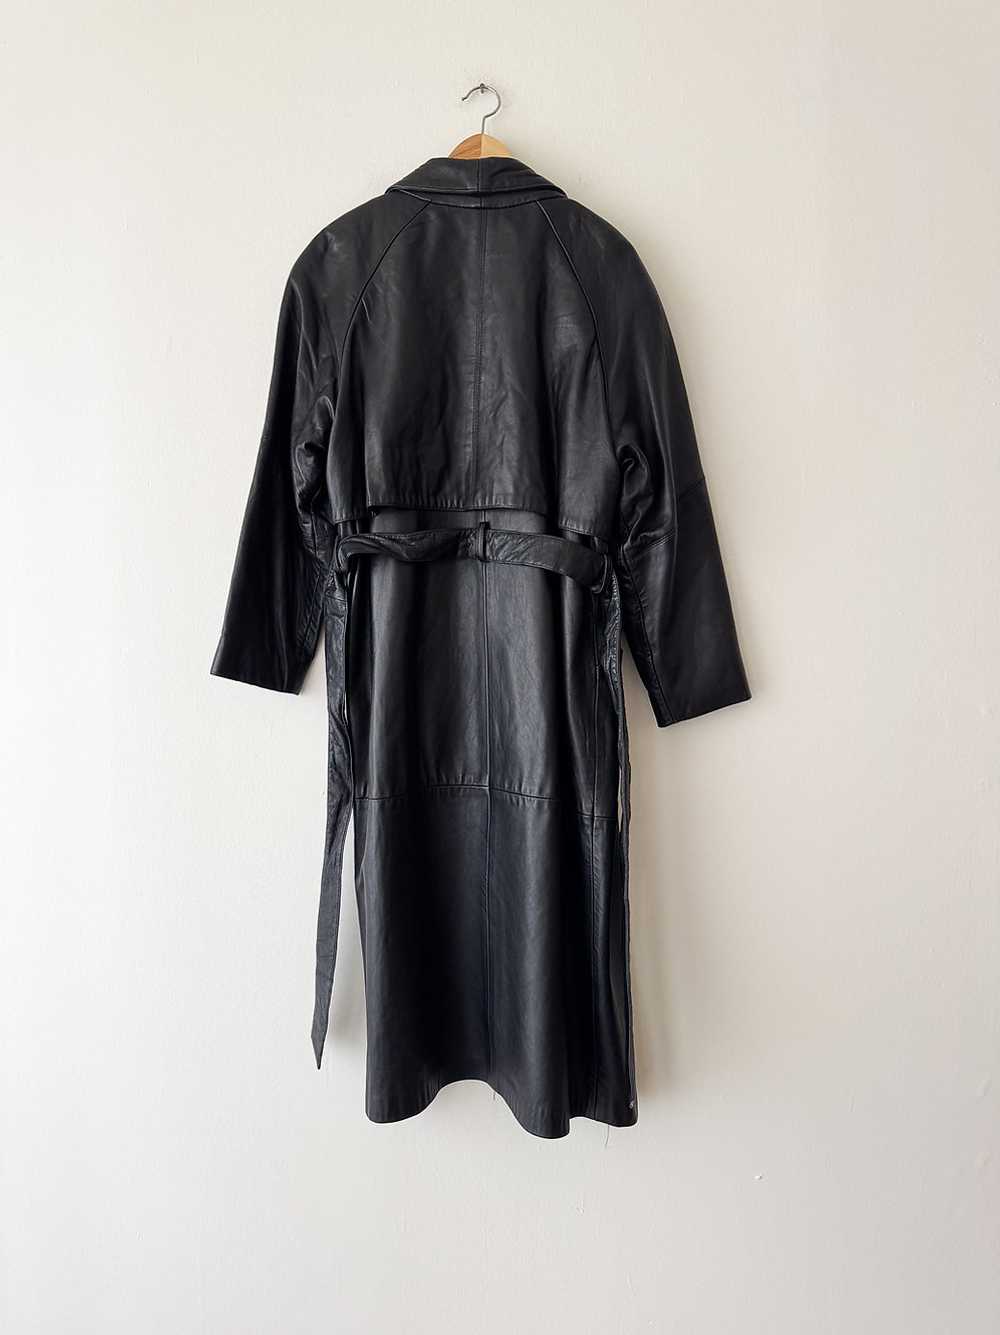 Black Leather Duster - image 5